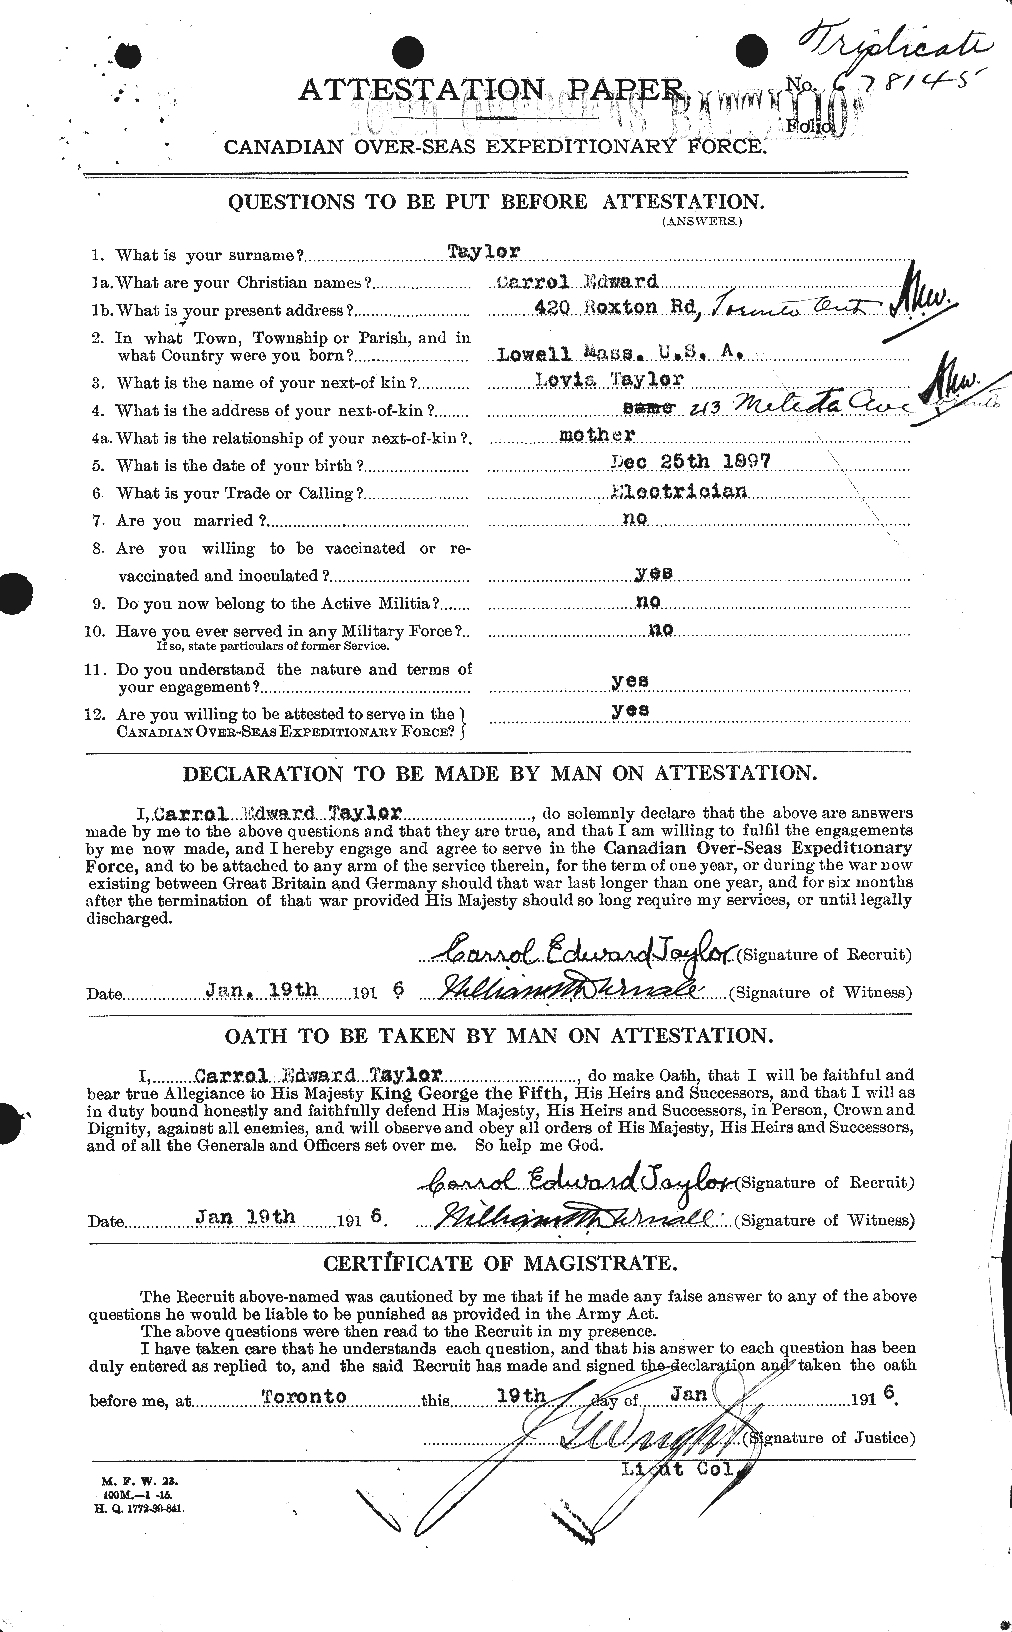 Personnel Records of the First World War - CEF 626787a